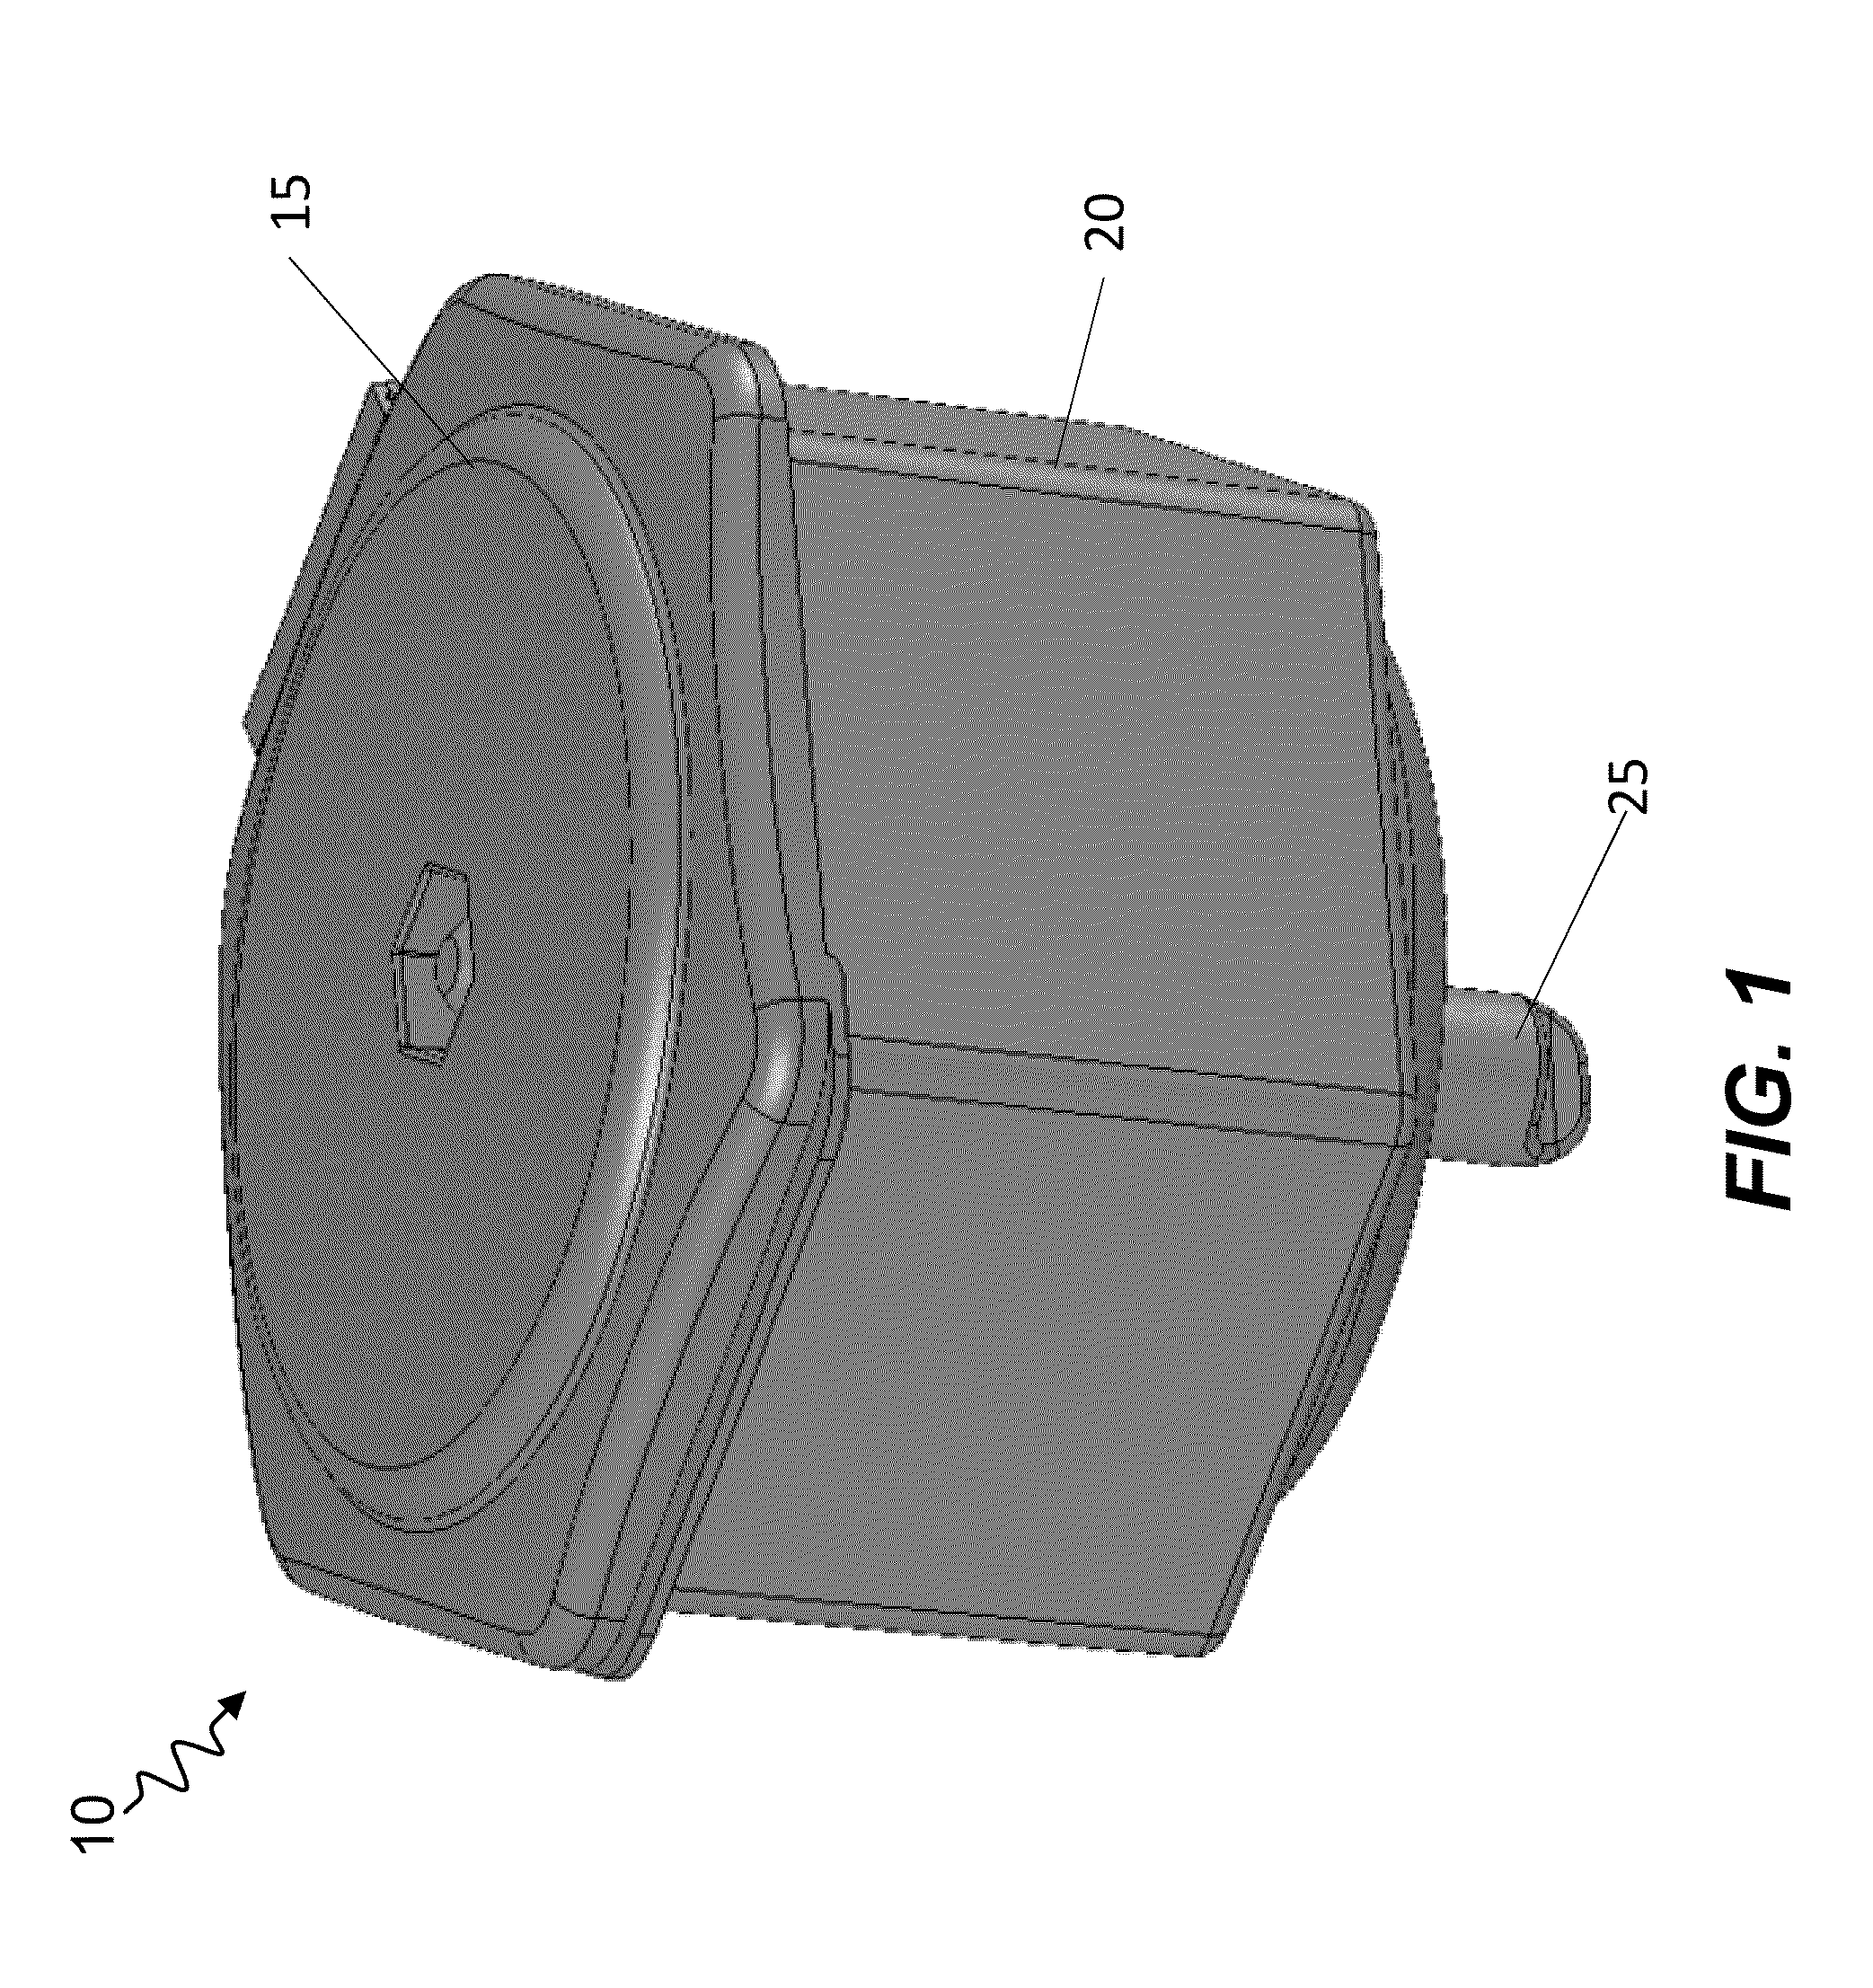 Receptacle for attachment to a rim